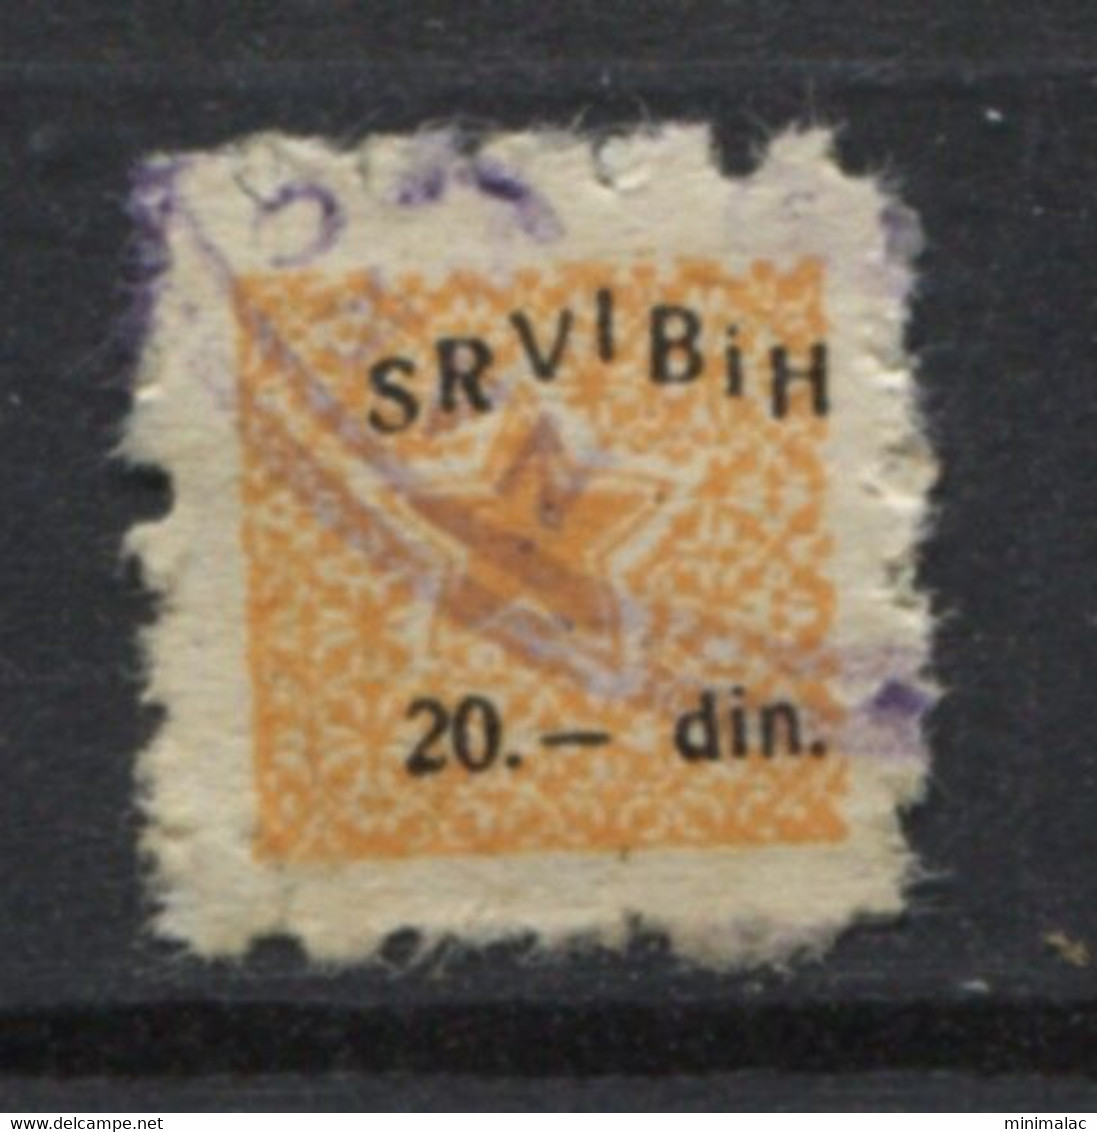 Yugoslavia 1958, Stamp For Membership, SRVIBiH, Labor Union, Administrative Stamp - Revenue, Tax Stamp, 20d    Used - Service